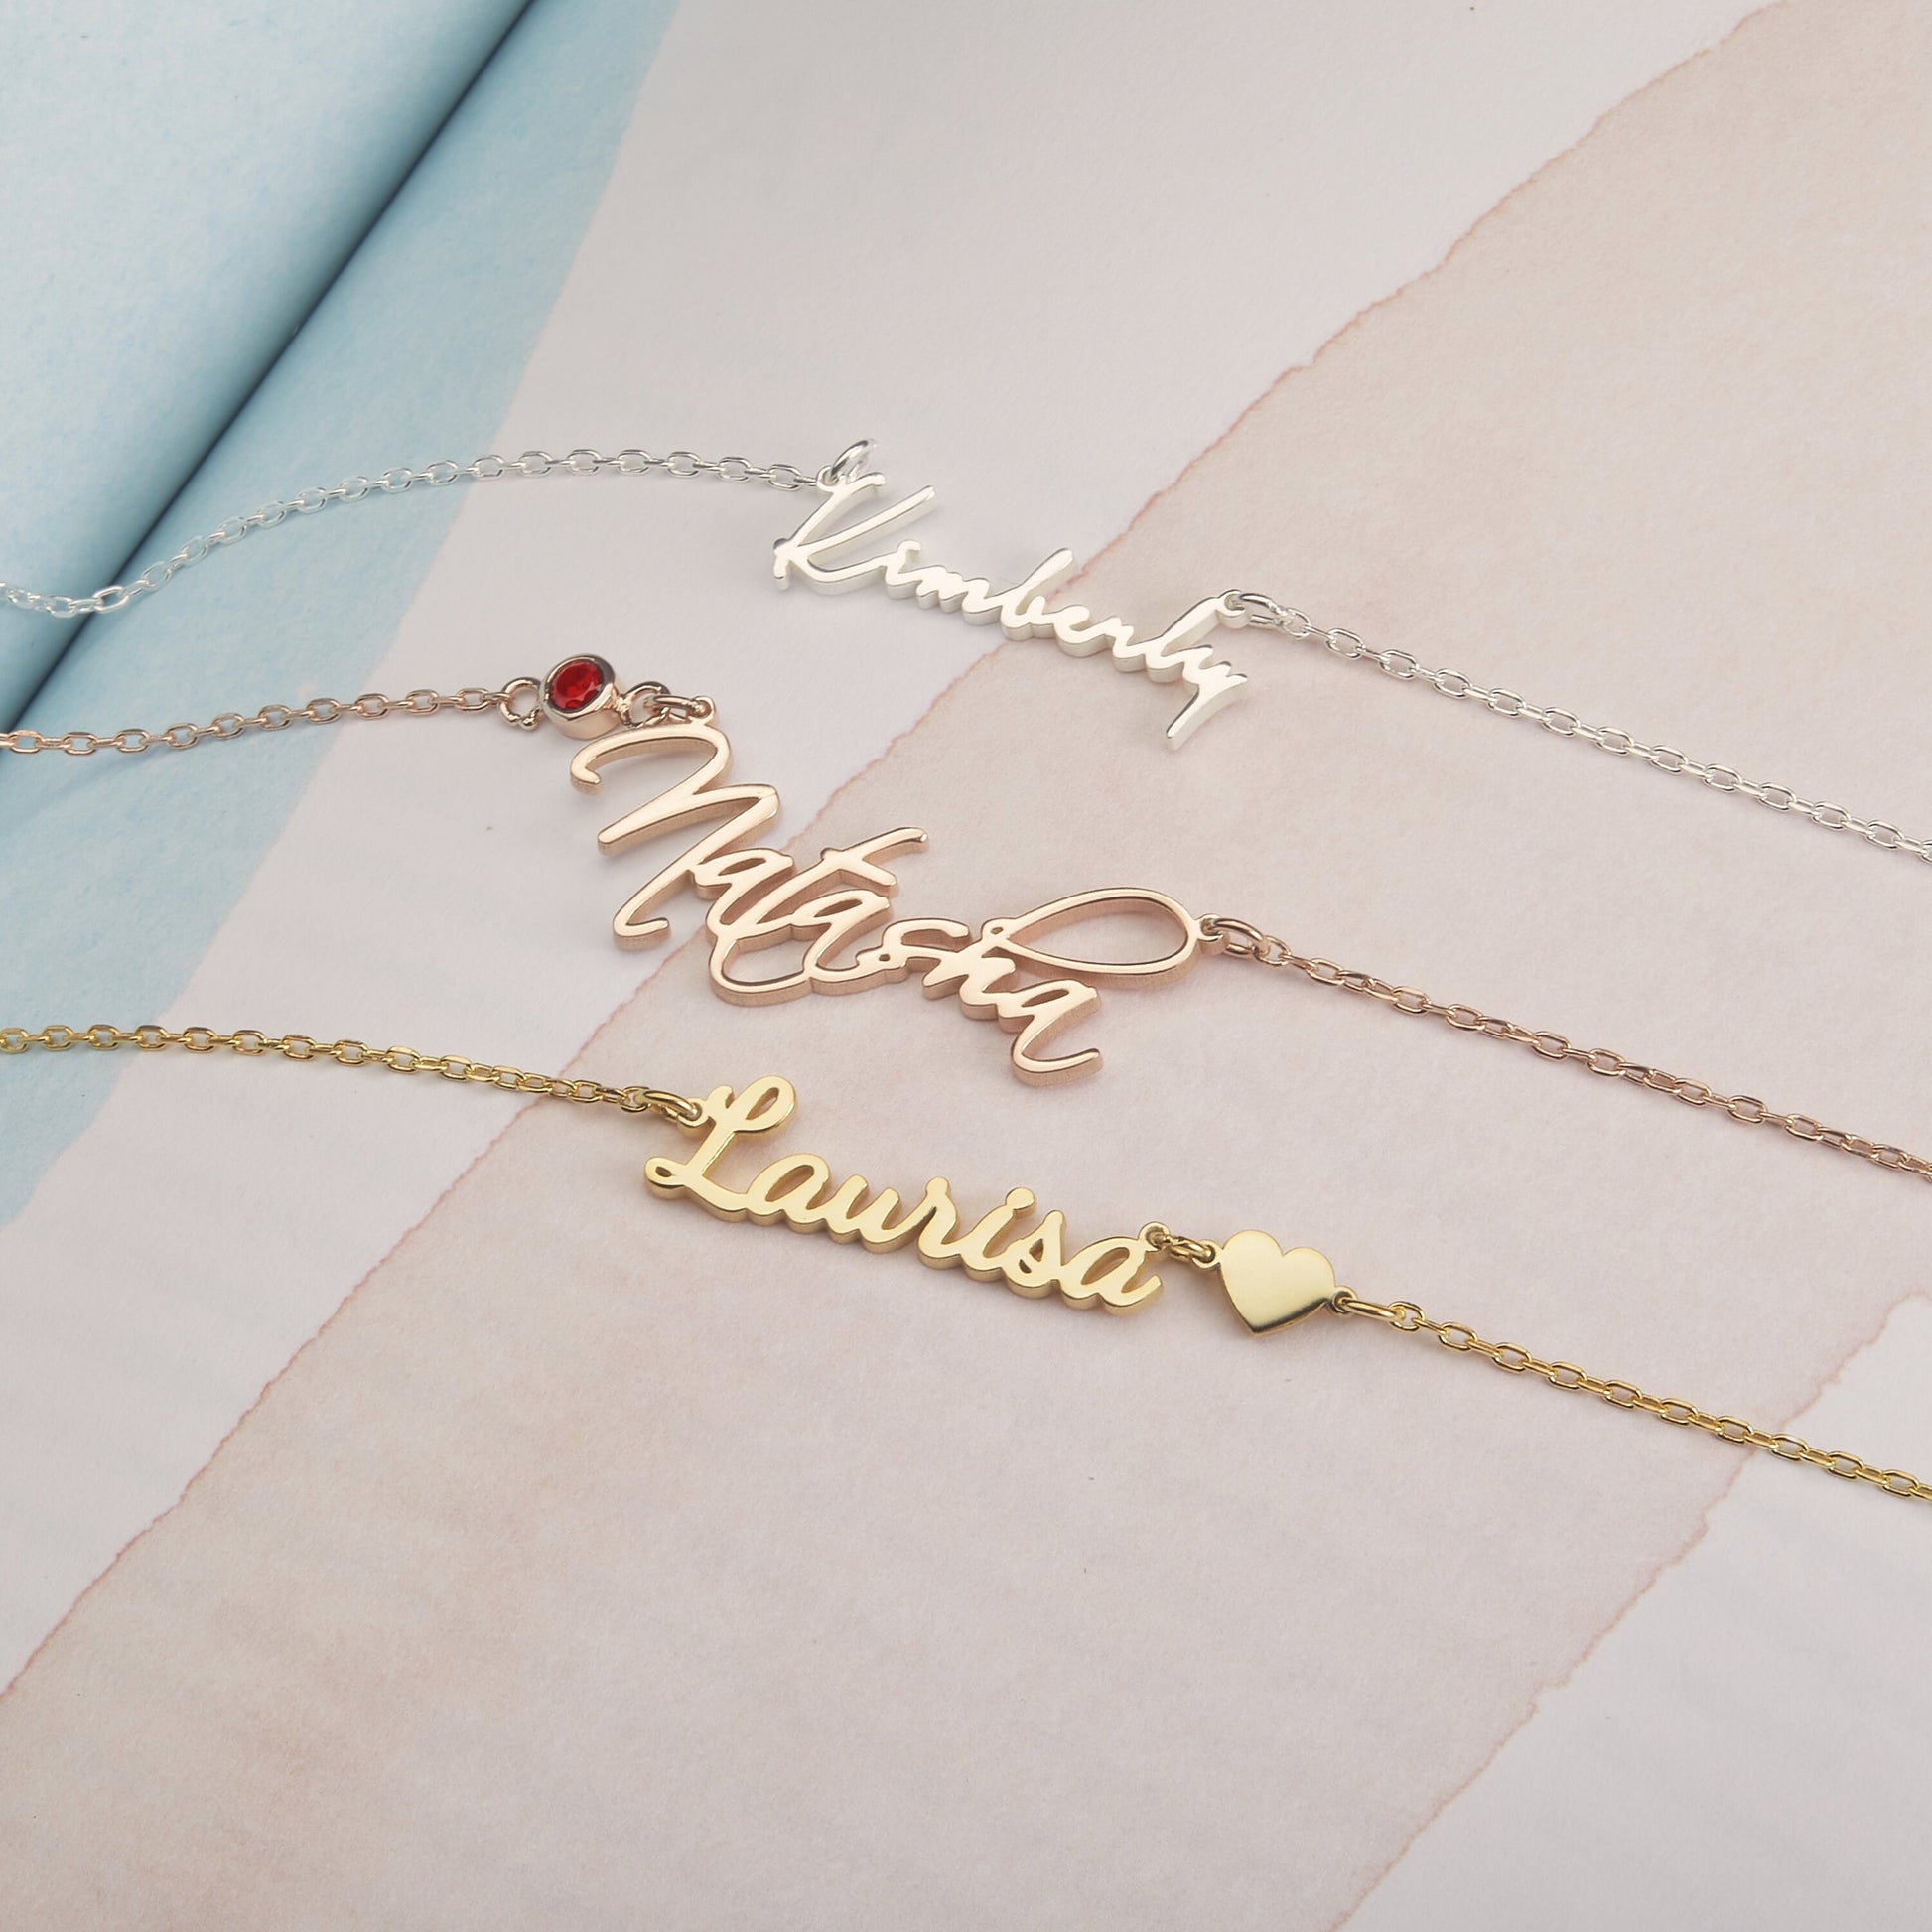 Children Name Necklace | Custom Name Jewelry | Dainty Name Necklace |  Personalized Name Necklace | Baby Name